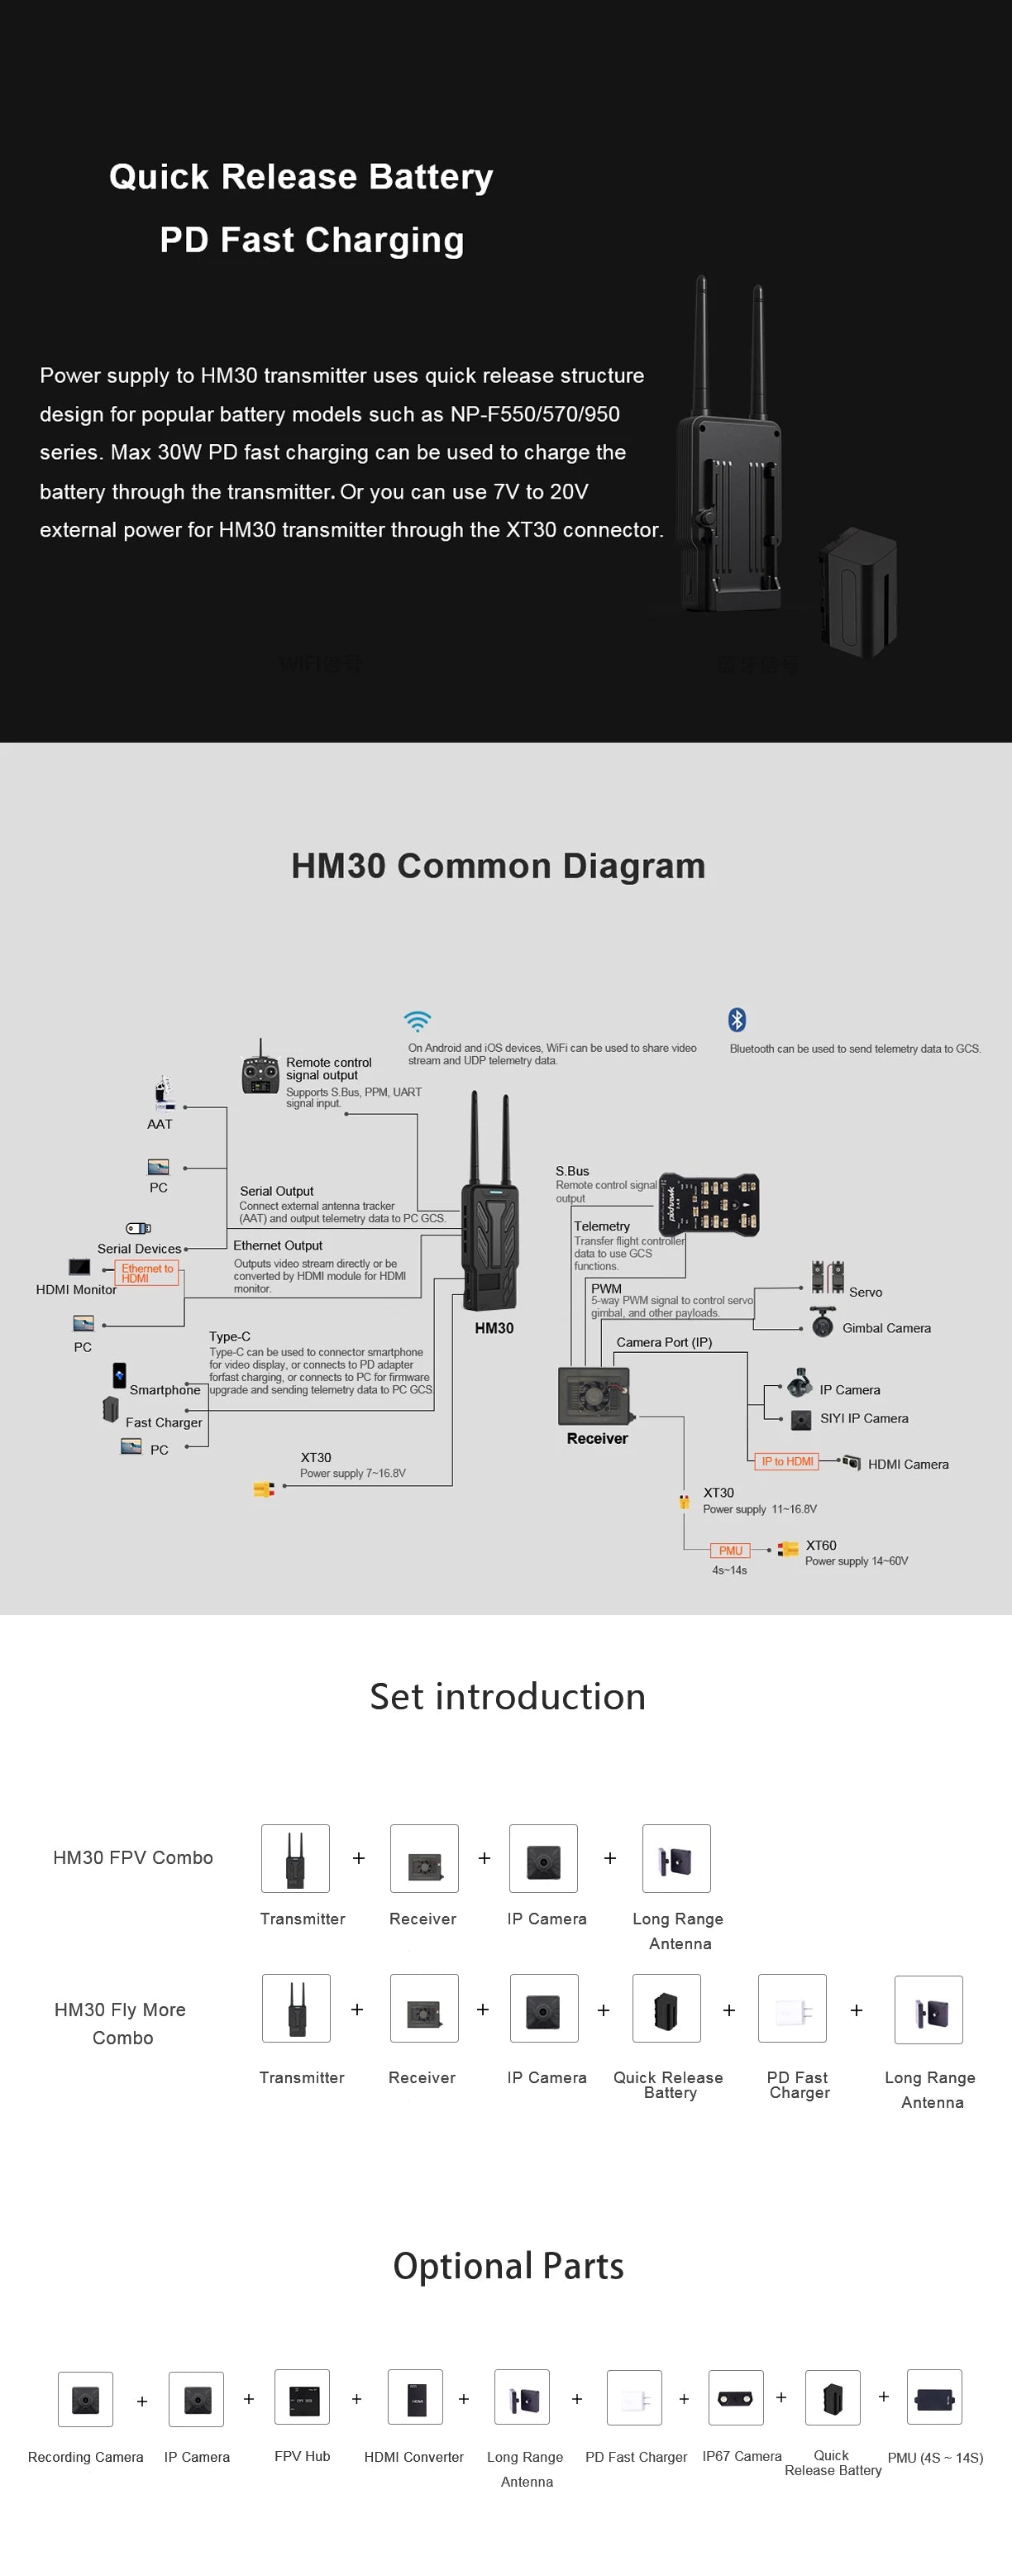 HM3O transmitter uses quick release structure design for popular battery models such as NP-